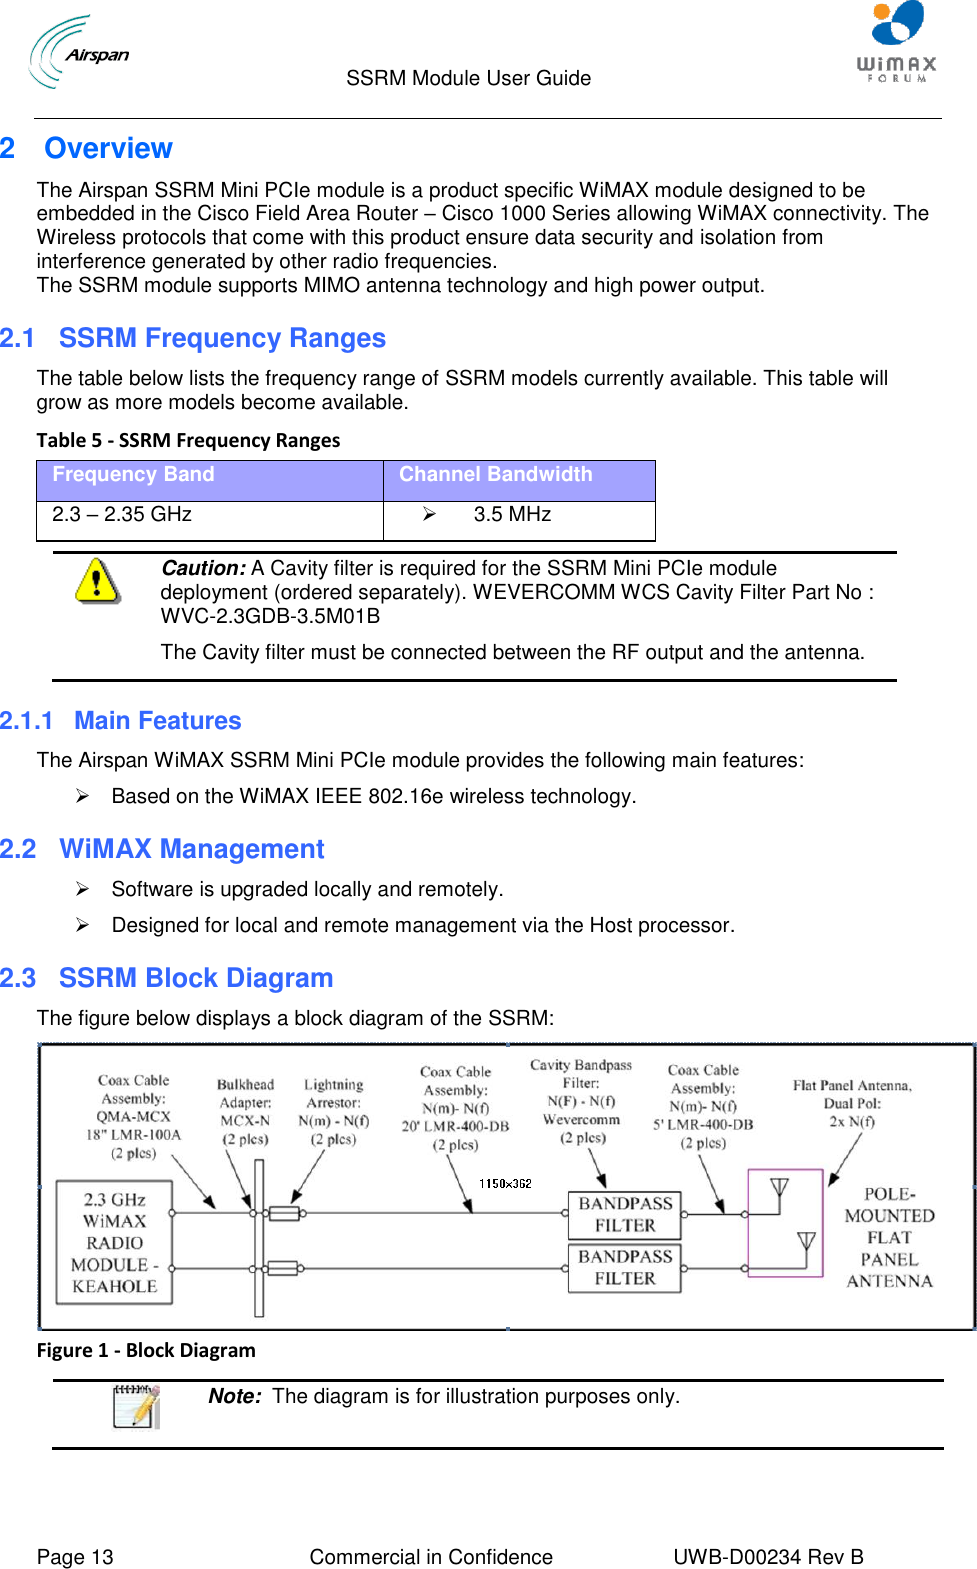                                  SSRM Module User Guide     Page 13  Commercial in Confidence  UWB-D00234 Rev B    2  Overview The Airspan SSRM Mini PCIe module is a product specific WiMAX module designed to be embedded in the Cisco Field Area Router – Cisco 1000 Series allowing WiMAX connectivity. The Wireless protocols that come with this product ensure data security and isolation from interference generated by other radio frequencies. The SSRM module supports MIMO antenna technology and high power output.  2.1 SSRM Frequency Ranges The table below lists the frequency range of SSRM models currently available. This table will grow as more models become available. Table 5 - SSRM Frequency Ranges Frequency Band Channel Bandwidth 2.3 – 2.35 GHz   3.5 MHz   Caution: A Cavity filter is required for the SSRM Mini PCIe module deployment (ordered separately). WEVERCOMM WCS Cavity Filter Part No : WVC-2.3GDB-3.5M01B The Cavity filter must be connected between the RF output and the antenna. 2.1.1  Main Features The Airspan WiMAX SSRM Mini PCIe module provides the following main features:   Based on the WiMAX IEEE 802.16e wireless technology. 2.2  WiMAX Management   Software is upgraded locally and remotely.   Designed for local and remote management via the Host processor. 2.3 SSRM Block Diagram The figure below displays a block diagram of the SSRM:  Figure 1 - Block Diagram   Note:  The diagram is for illustration purposes only.  